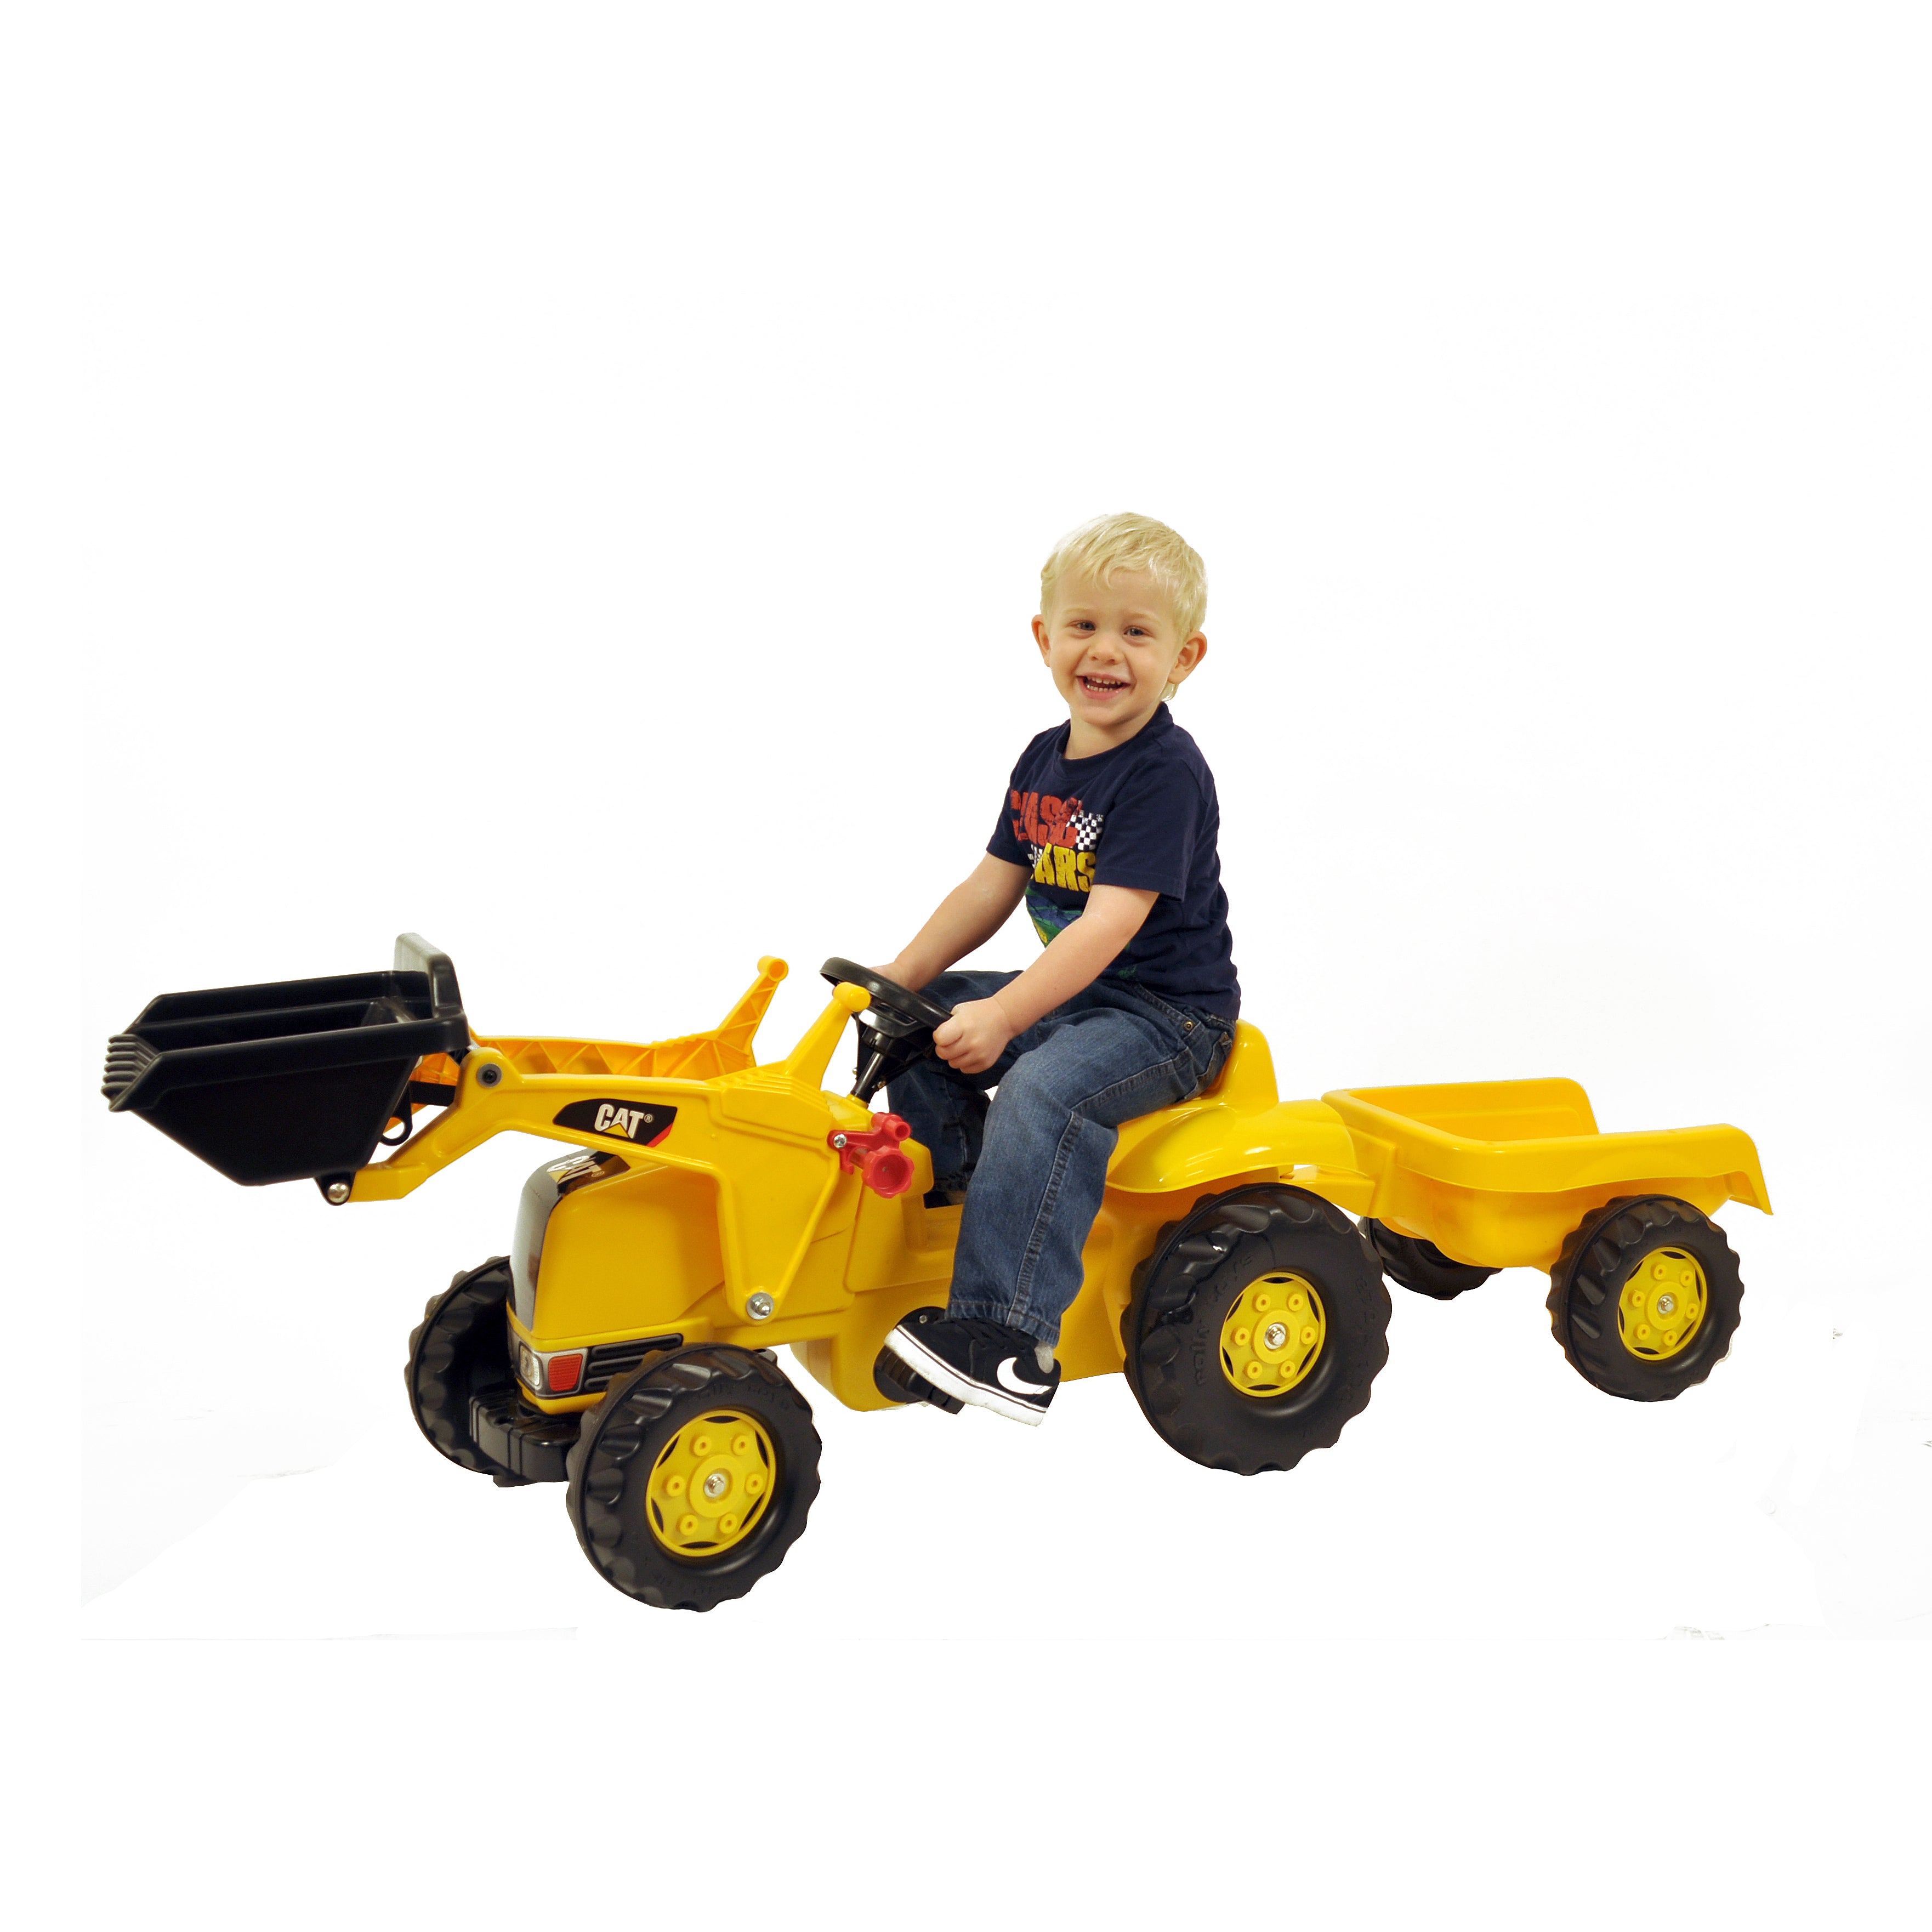 Child riding the made in germany blow molded resin front loader with trailer 